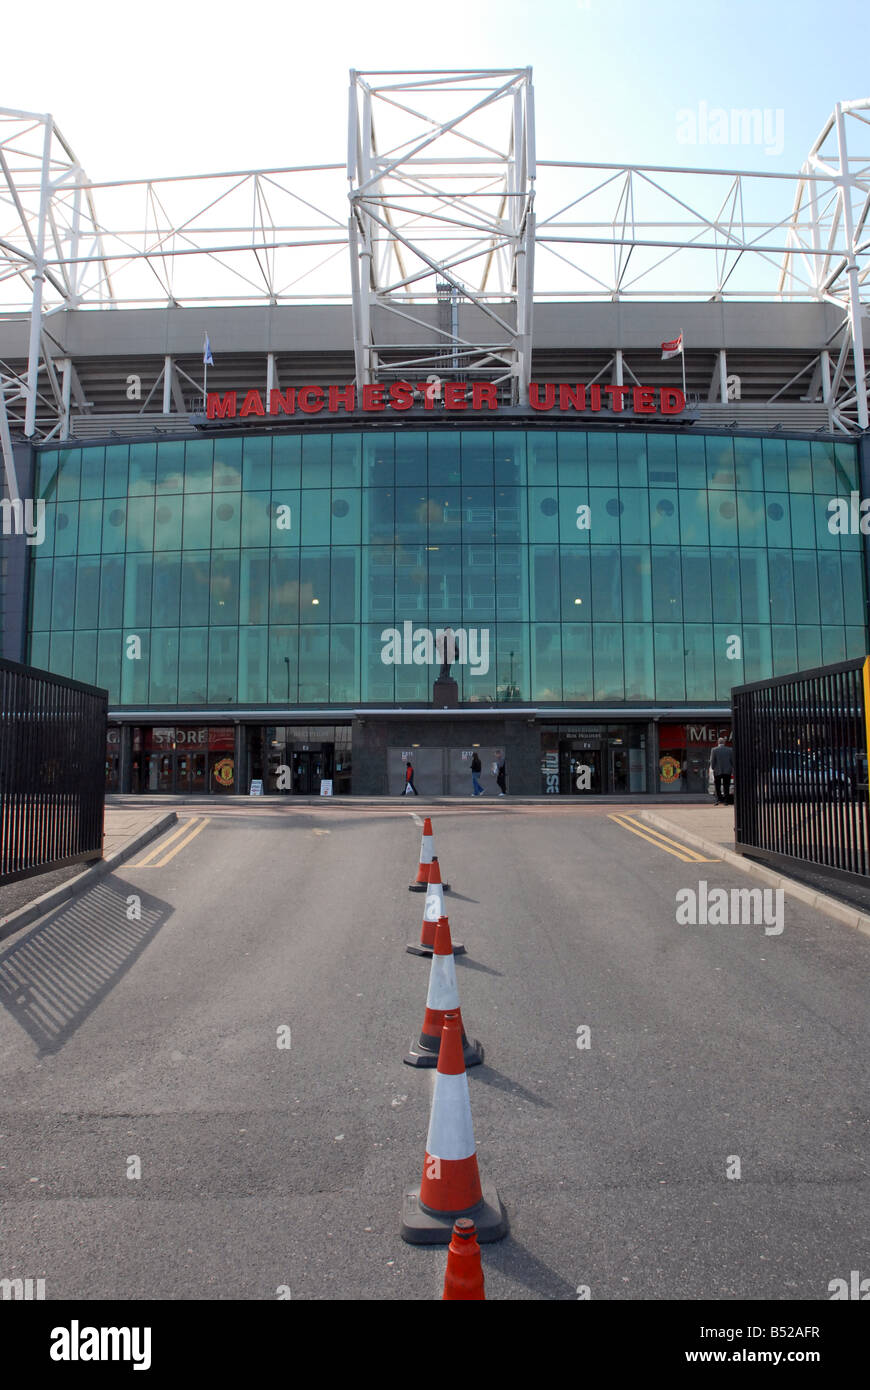 Old trafford manchester united football club mufc Stock Photo